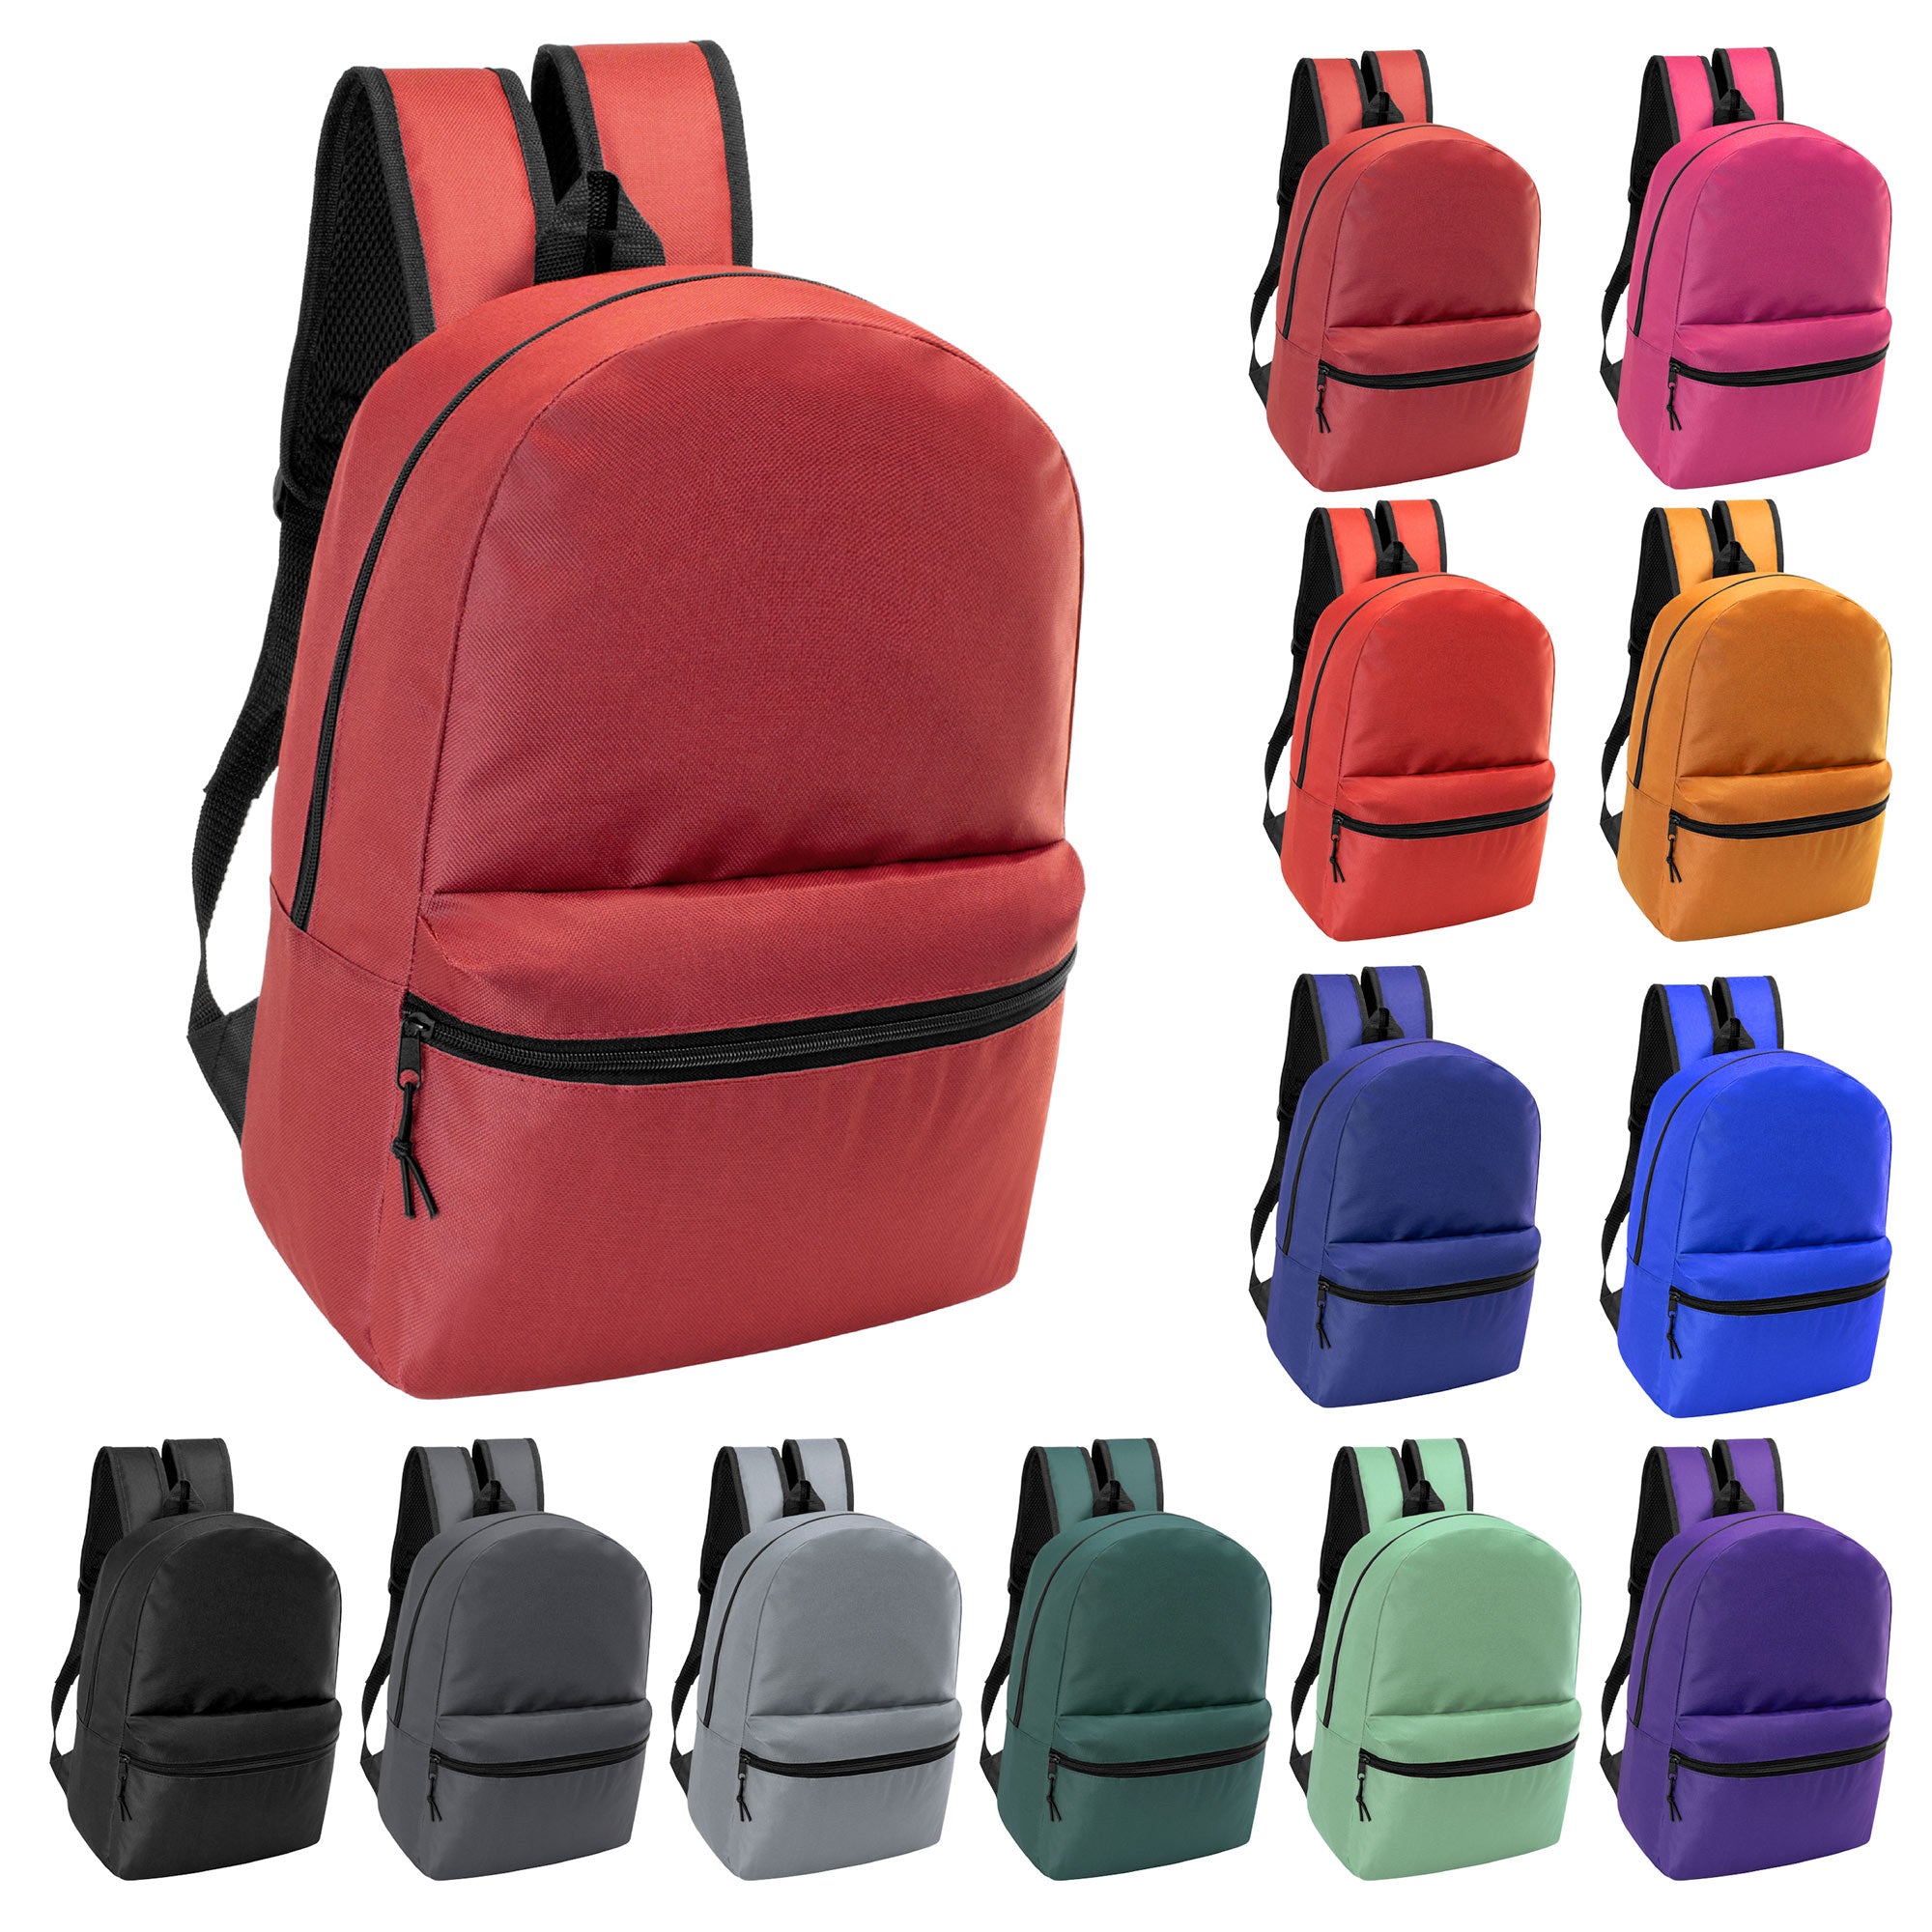 cheap wholesale backpacks in bulk for students